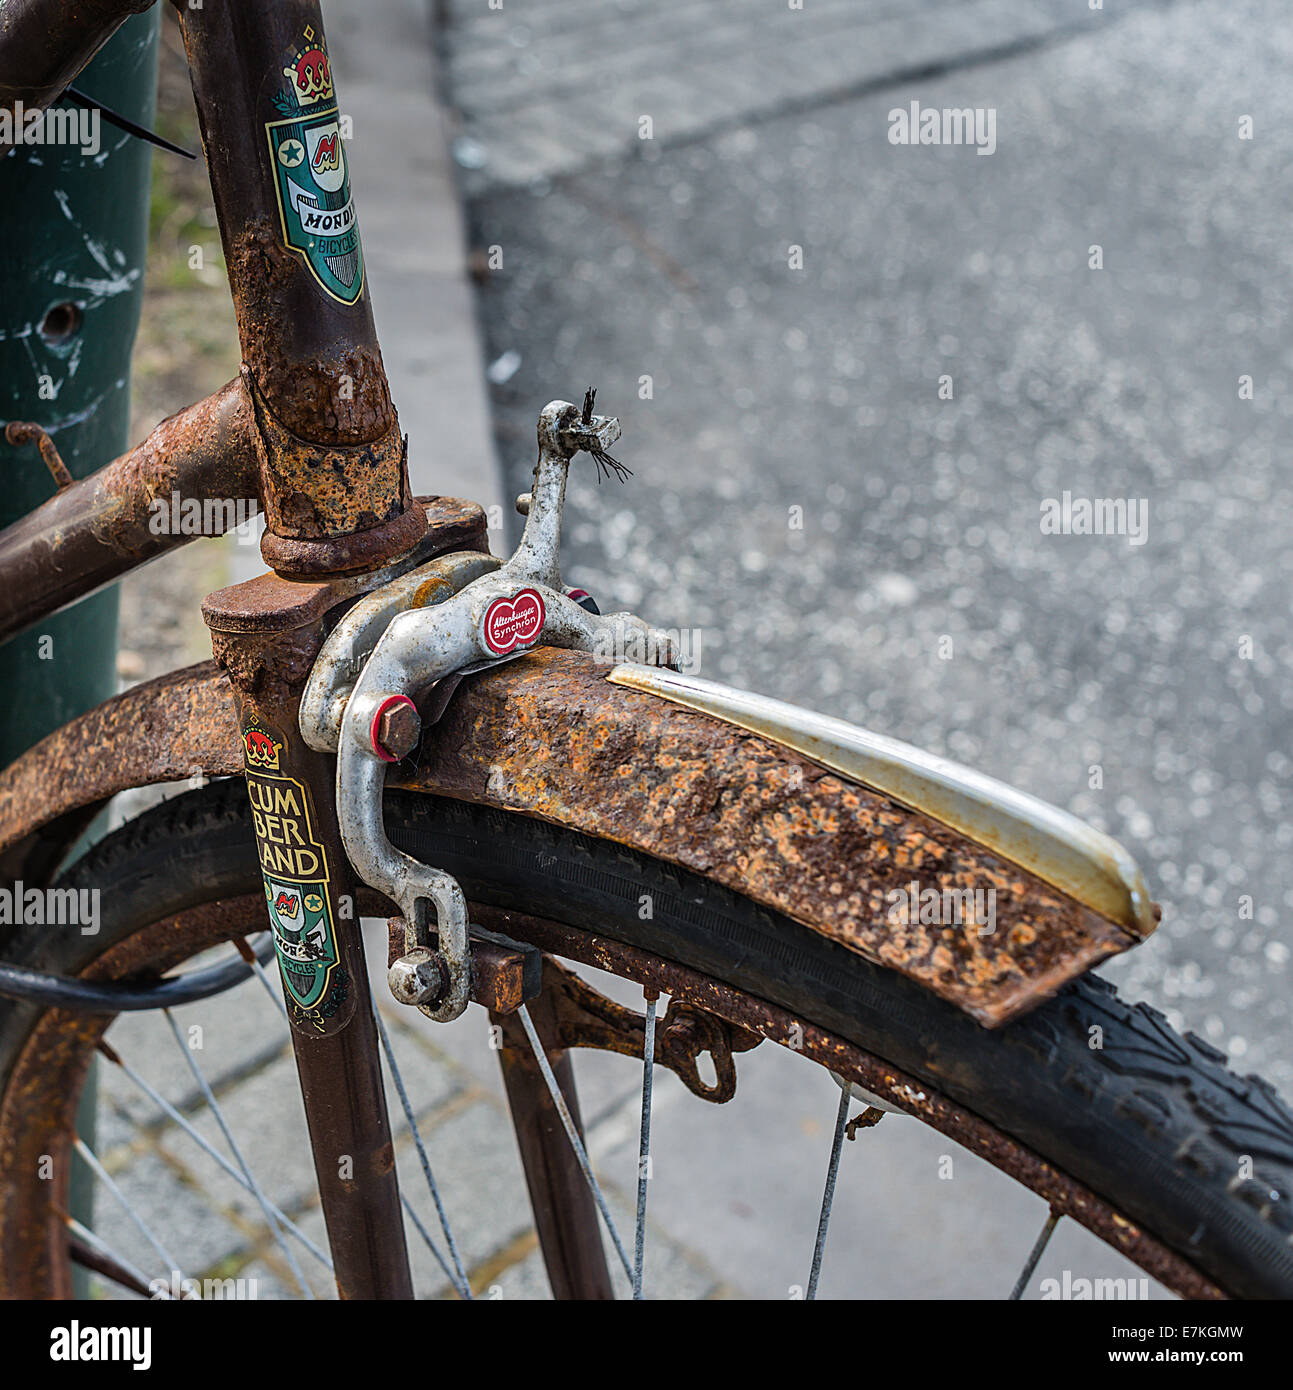 A rusty bike relic that has seen better days. Stock Photo